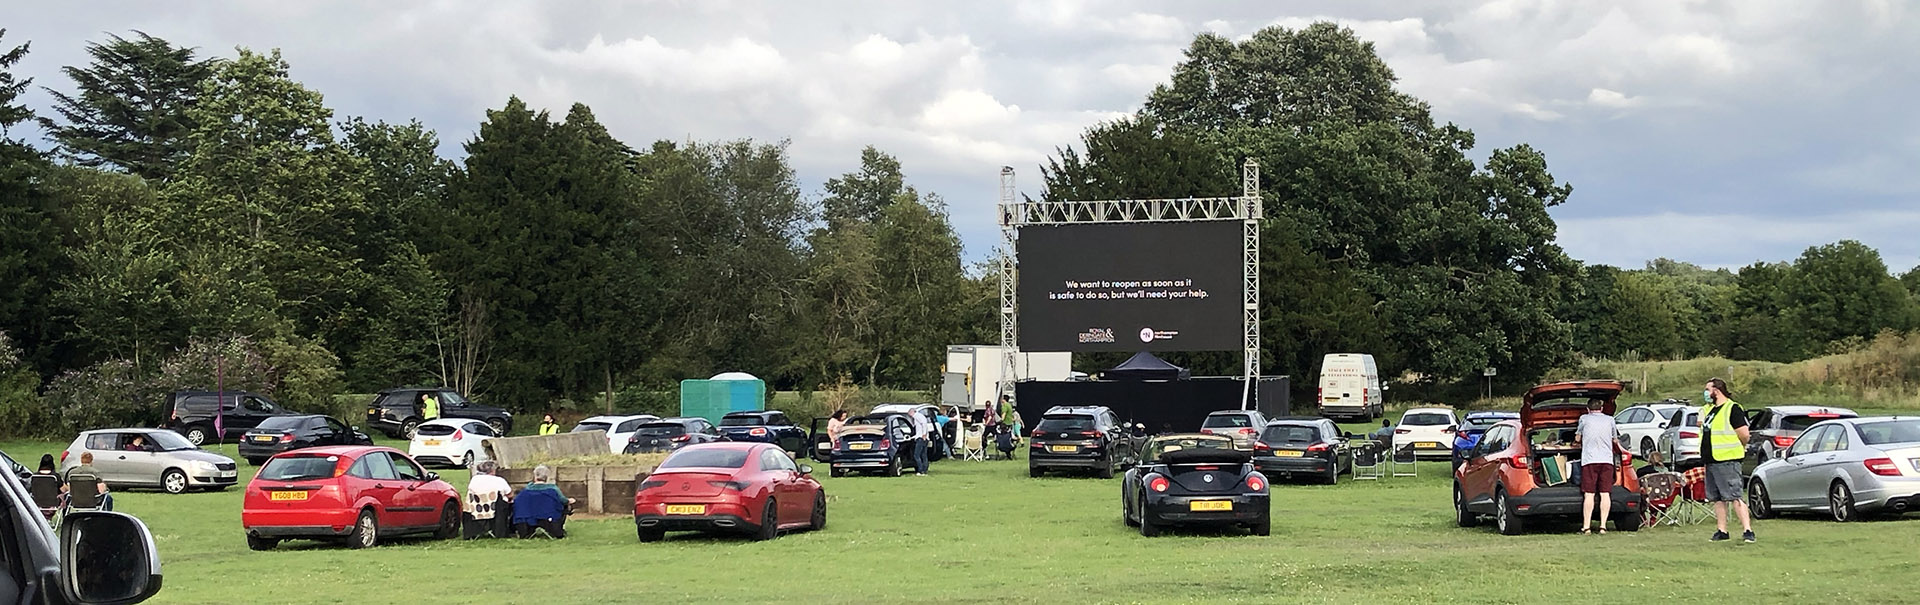 LED Screen for Drive In Cinema Films